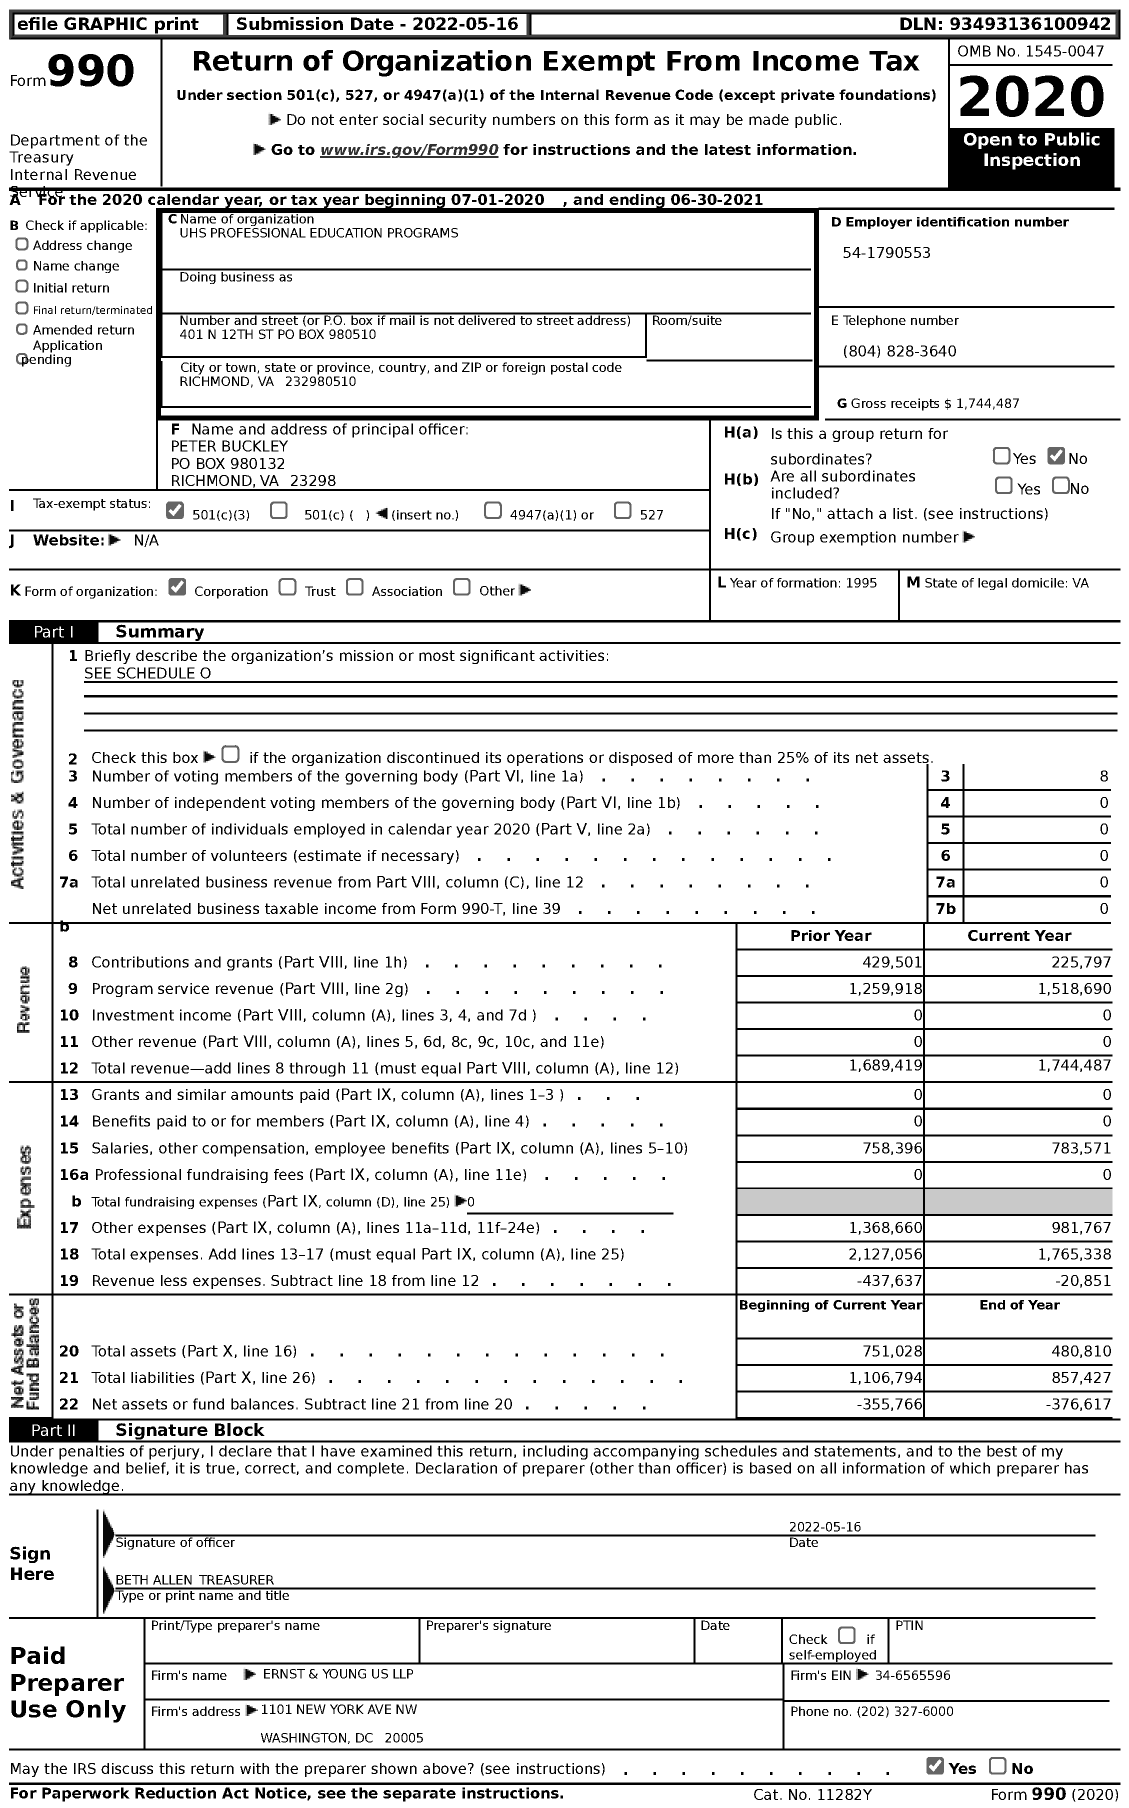 Image of first page of 2020 Form 990 for UHS Professional Education Programs